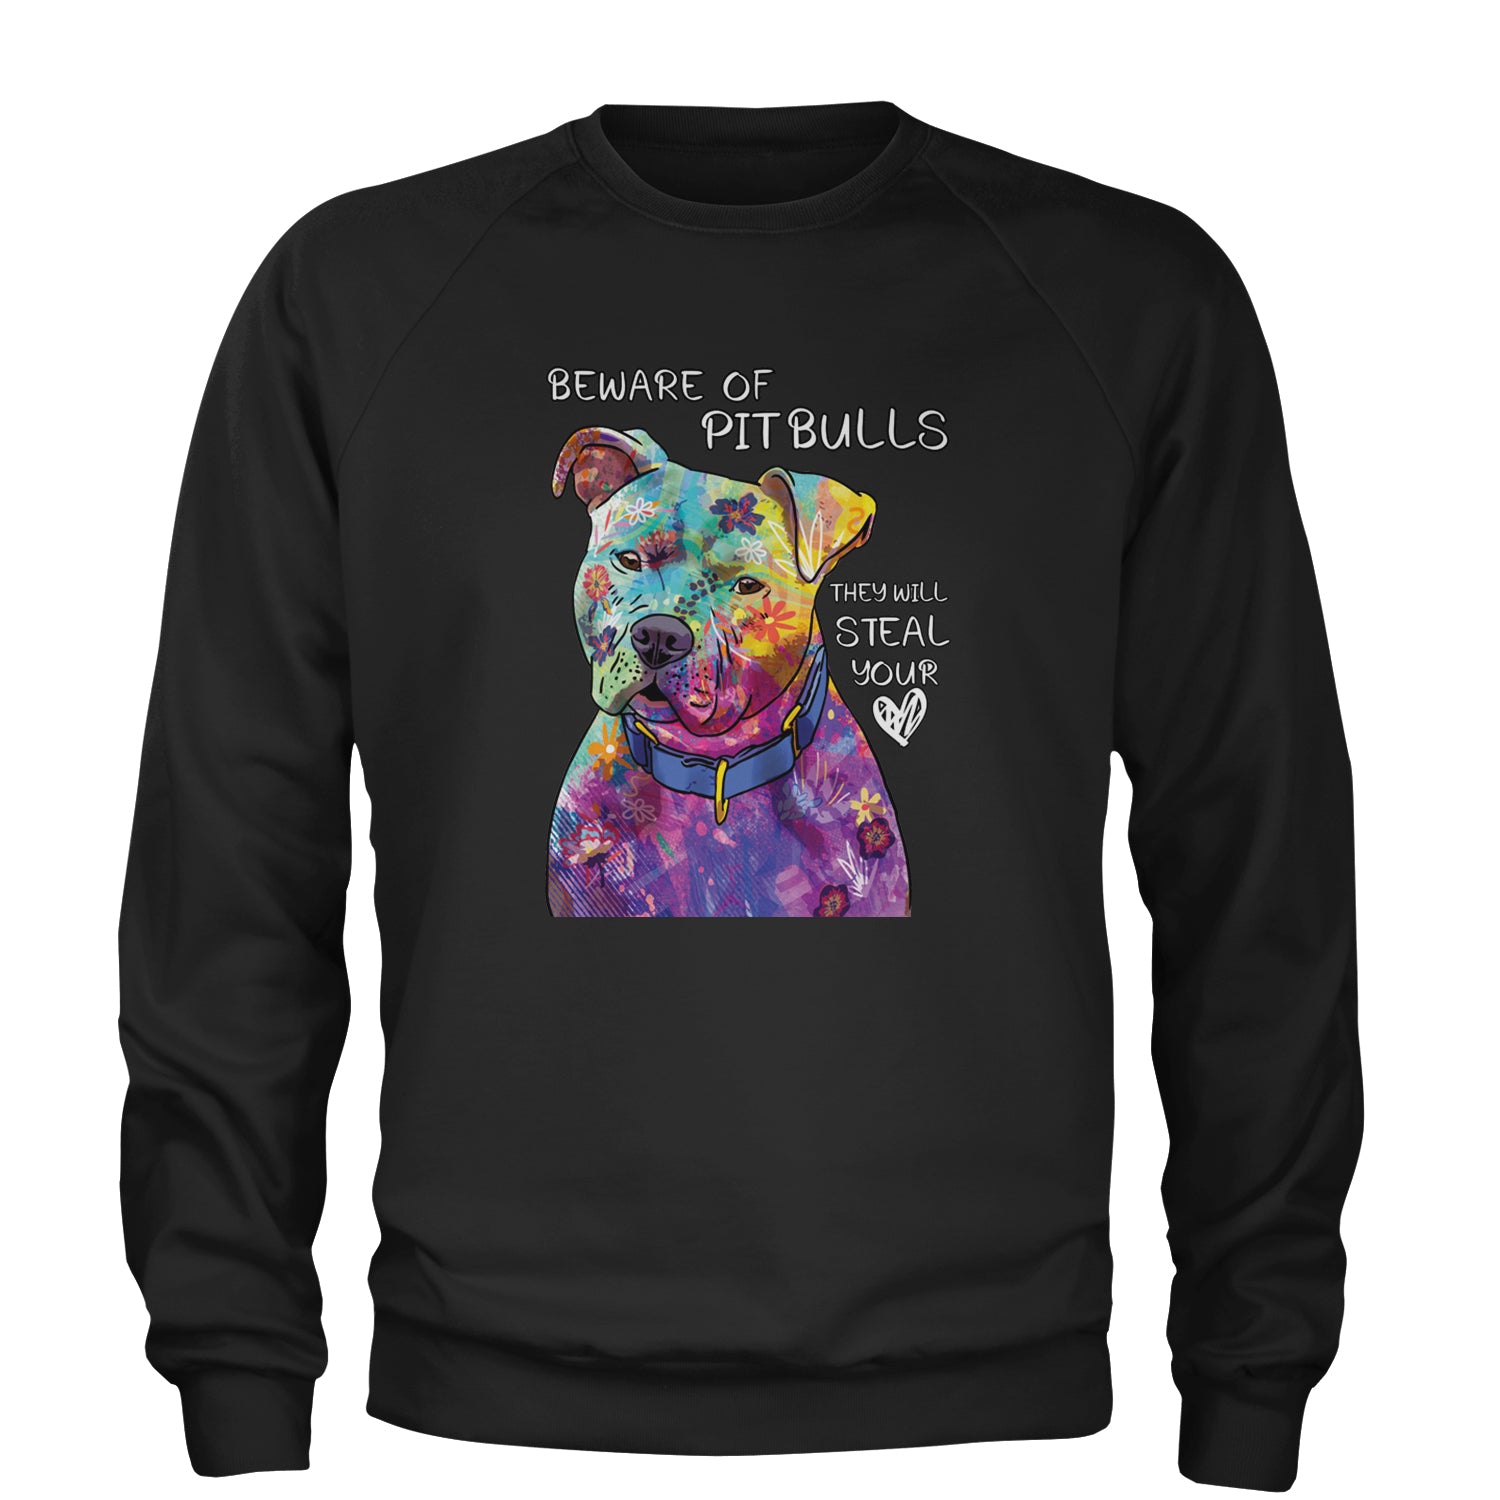 Beware Of Pit Bulls, They Will Steal Your Heart  Adult Crewneck Sweatshirt